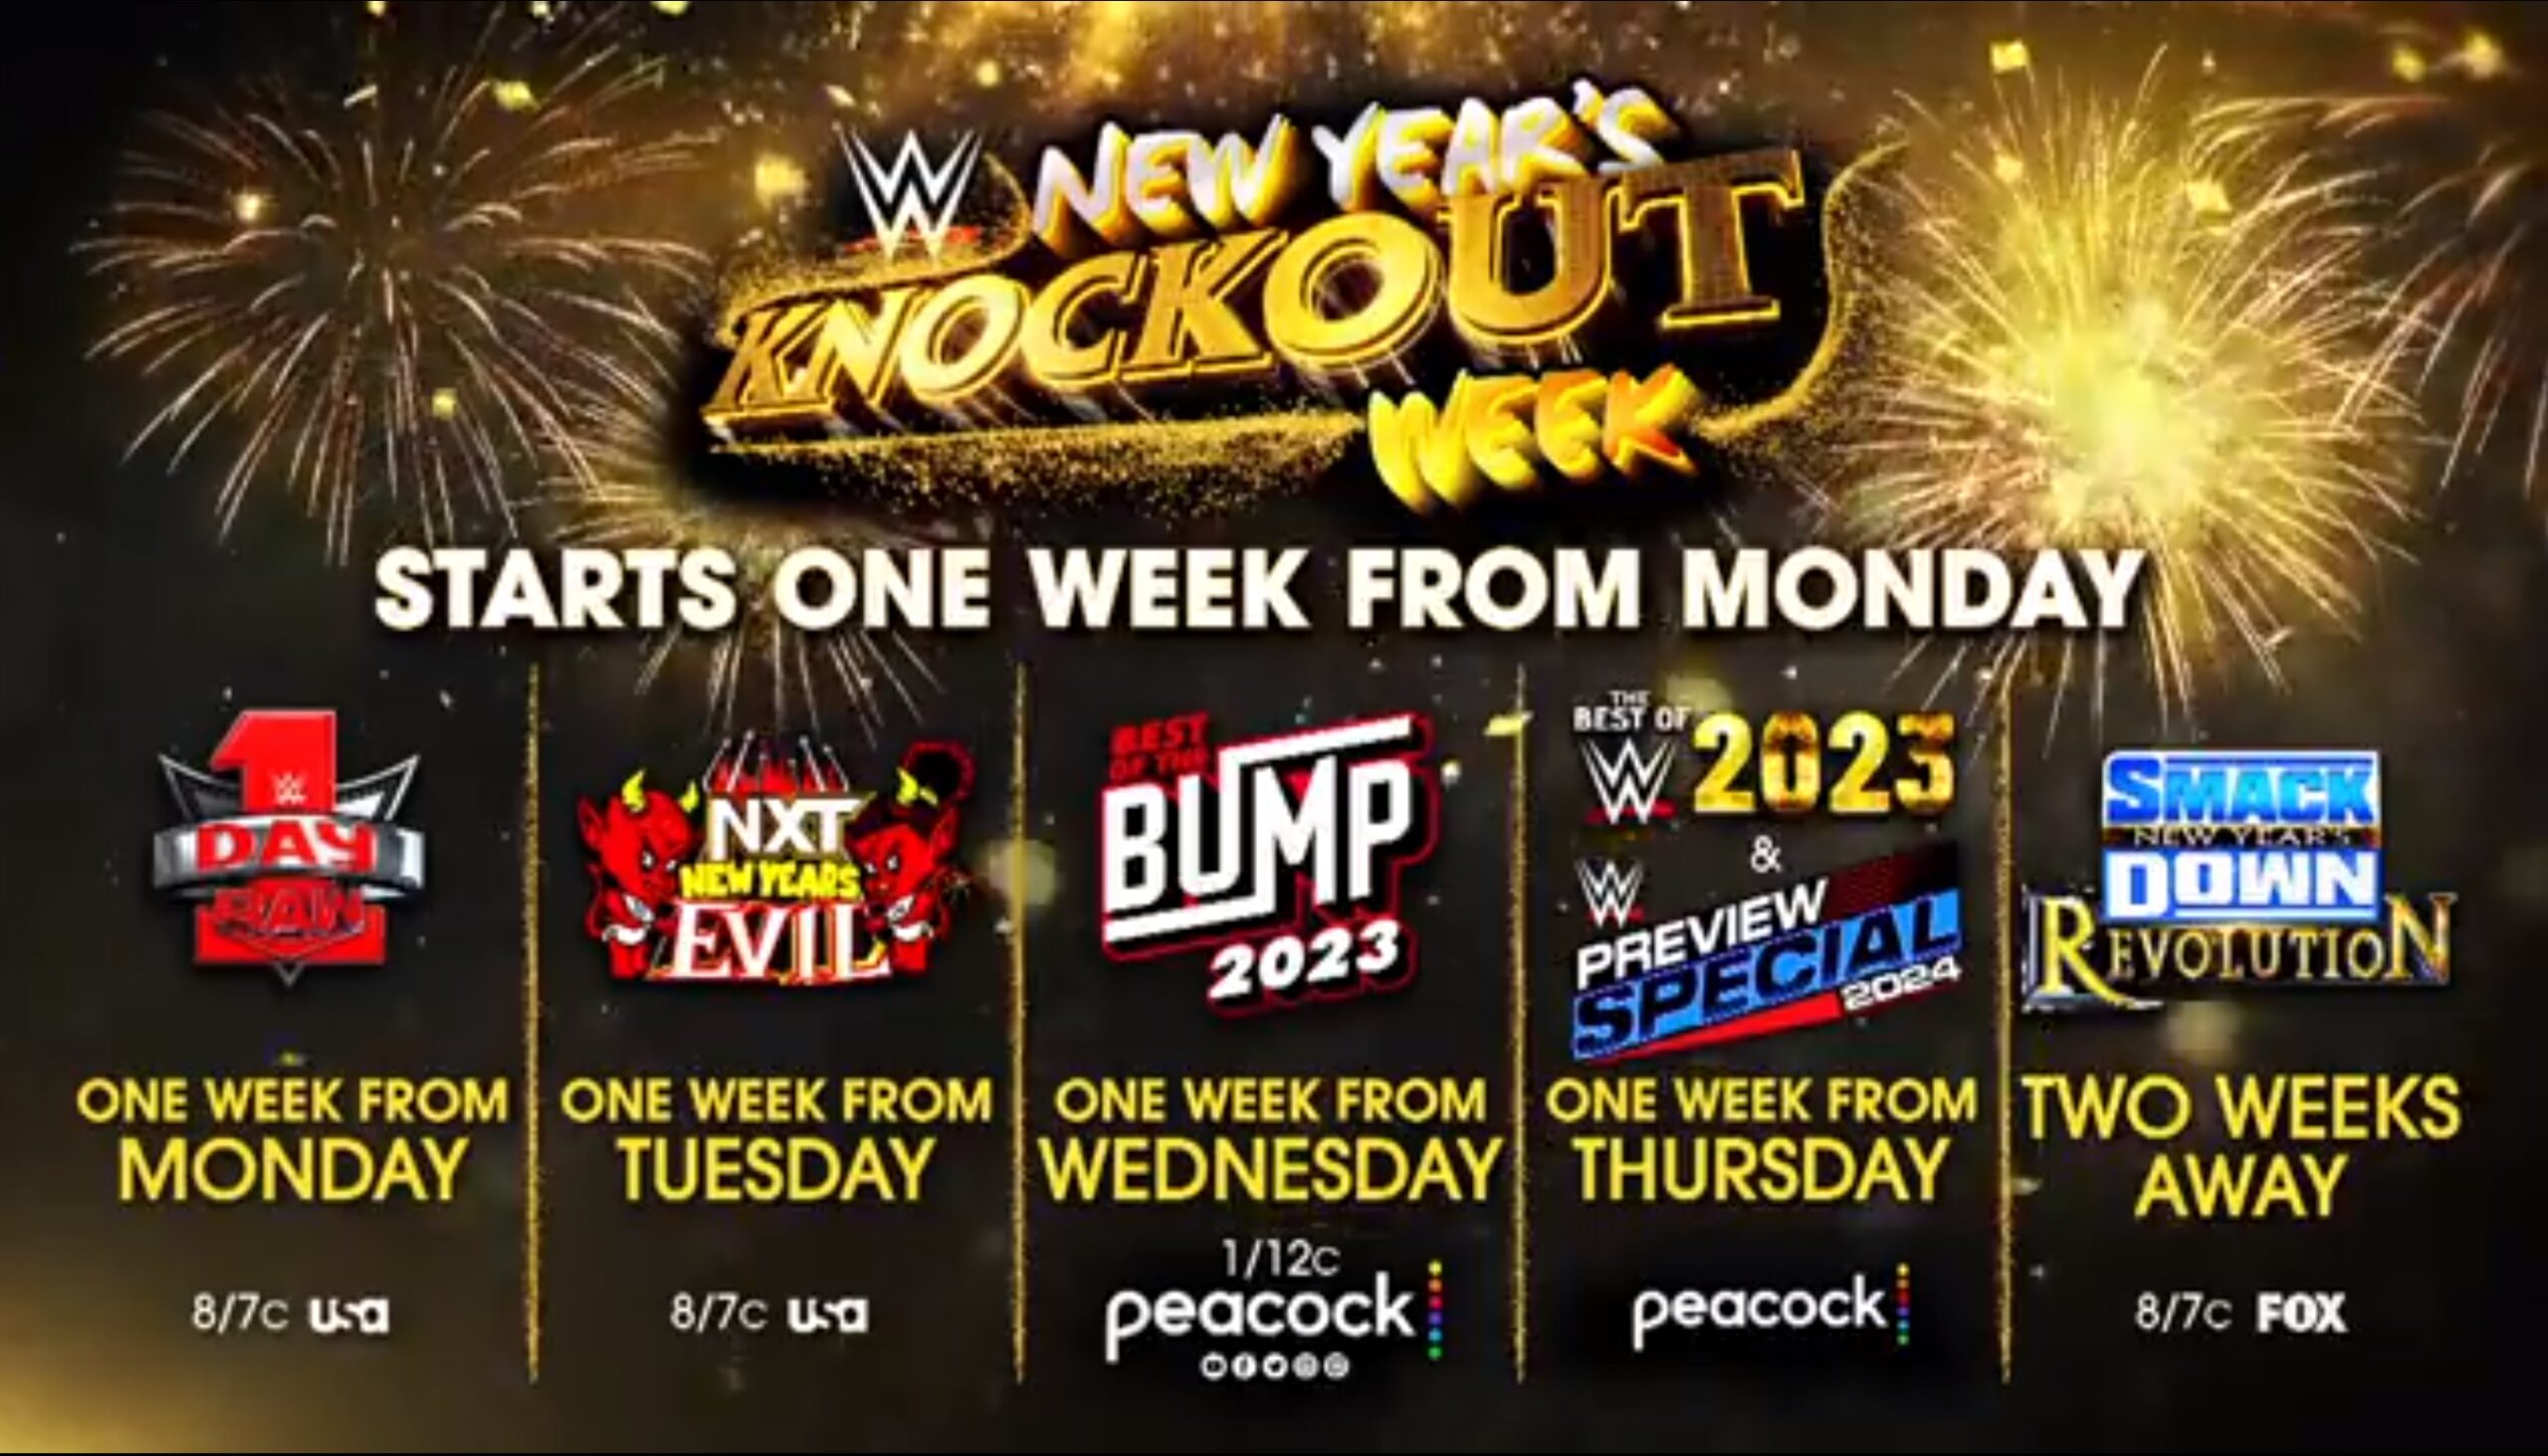 New Year’s Knockout Week Of Special Programming, New Year’s Revolution